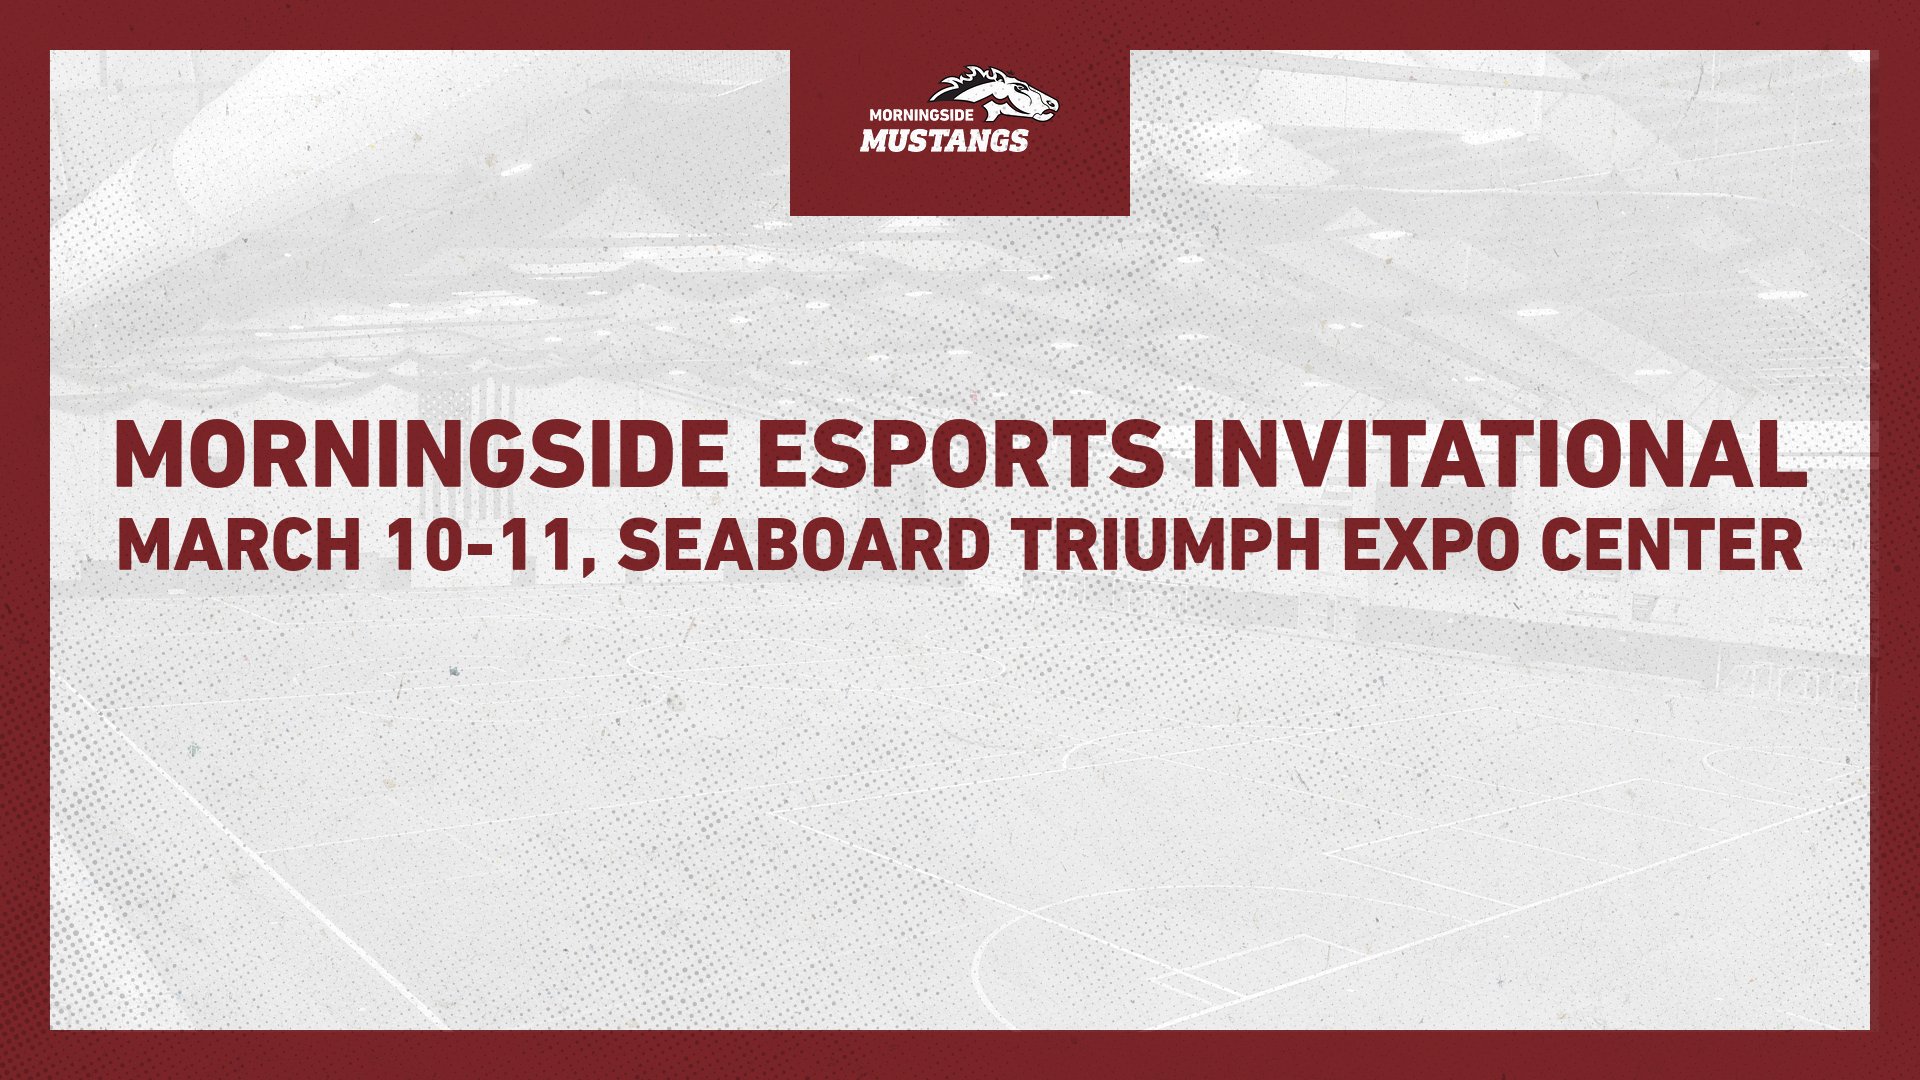 Morningside Esports Invitational set for March 10-11 at Seaboard Triumph Expo Center